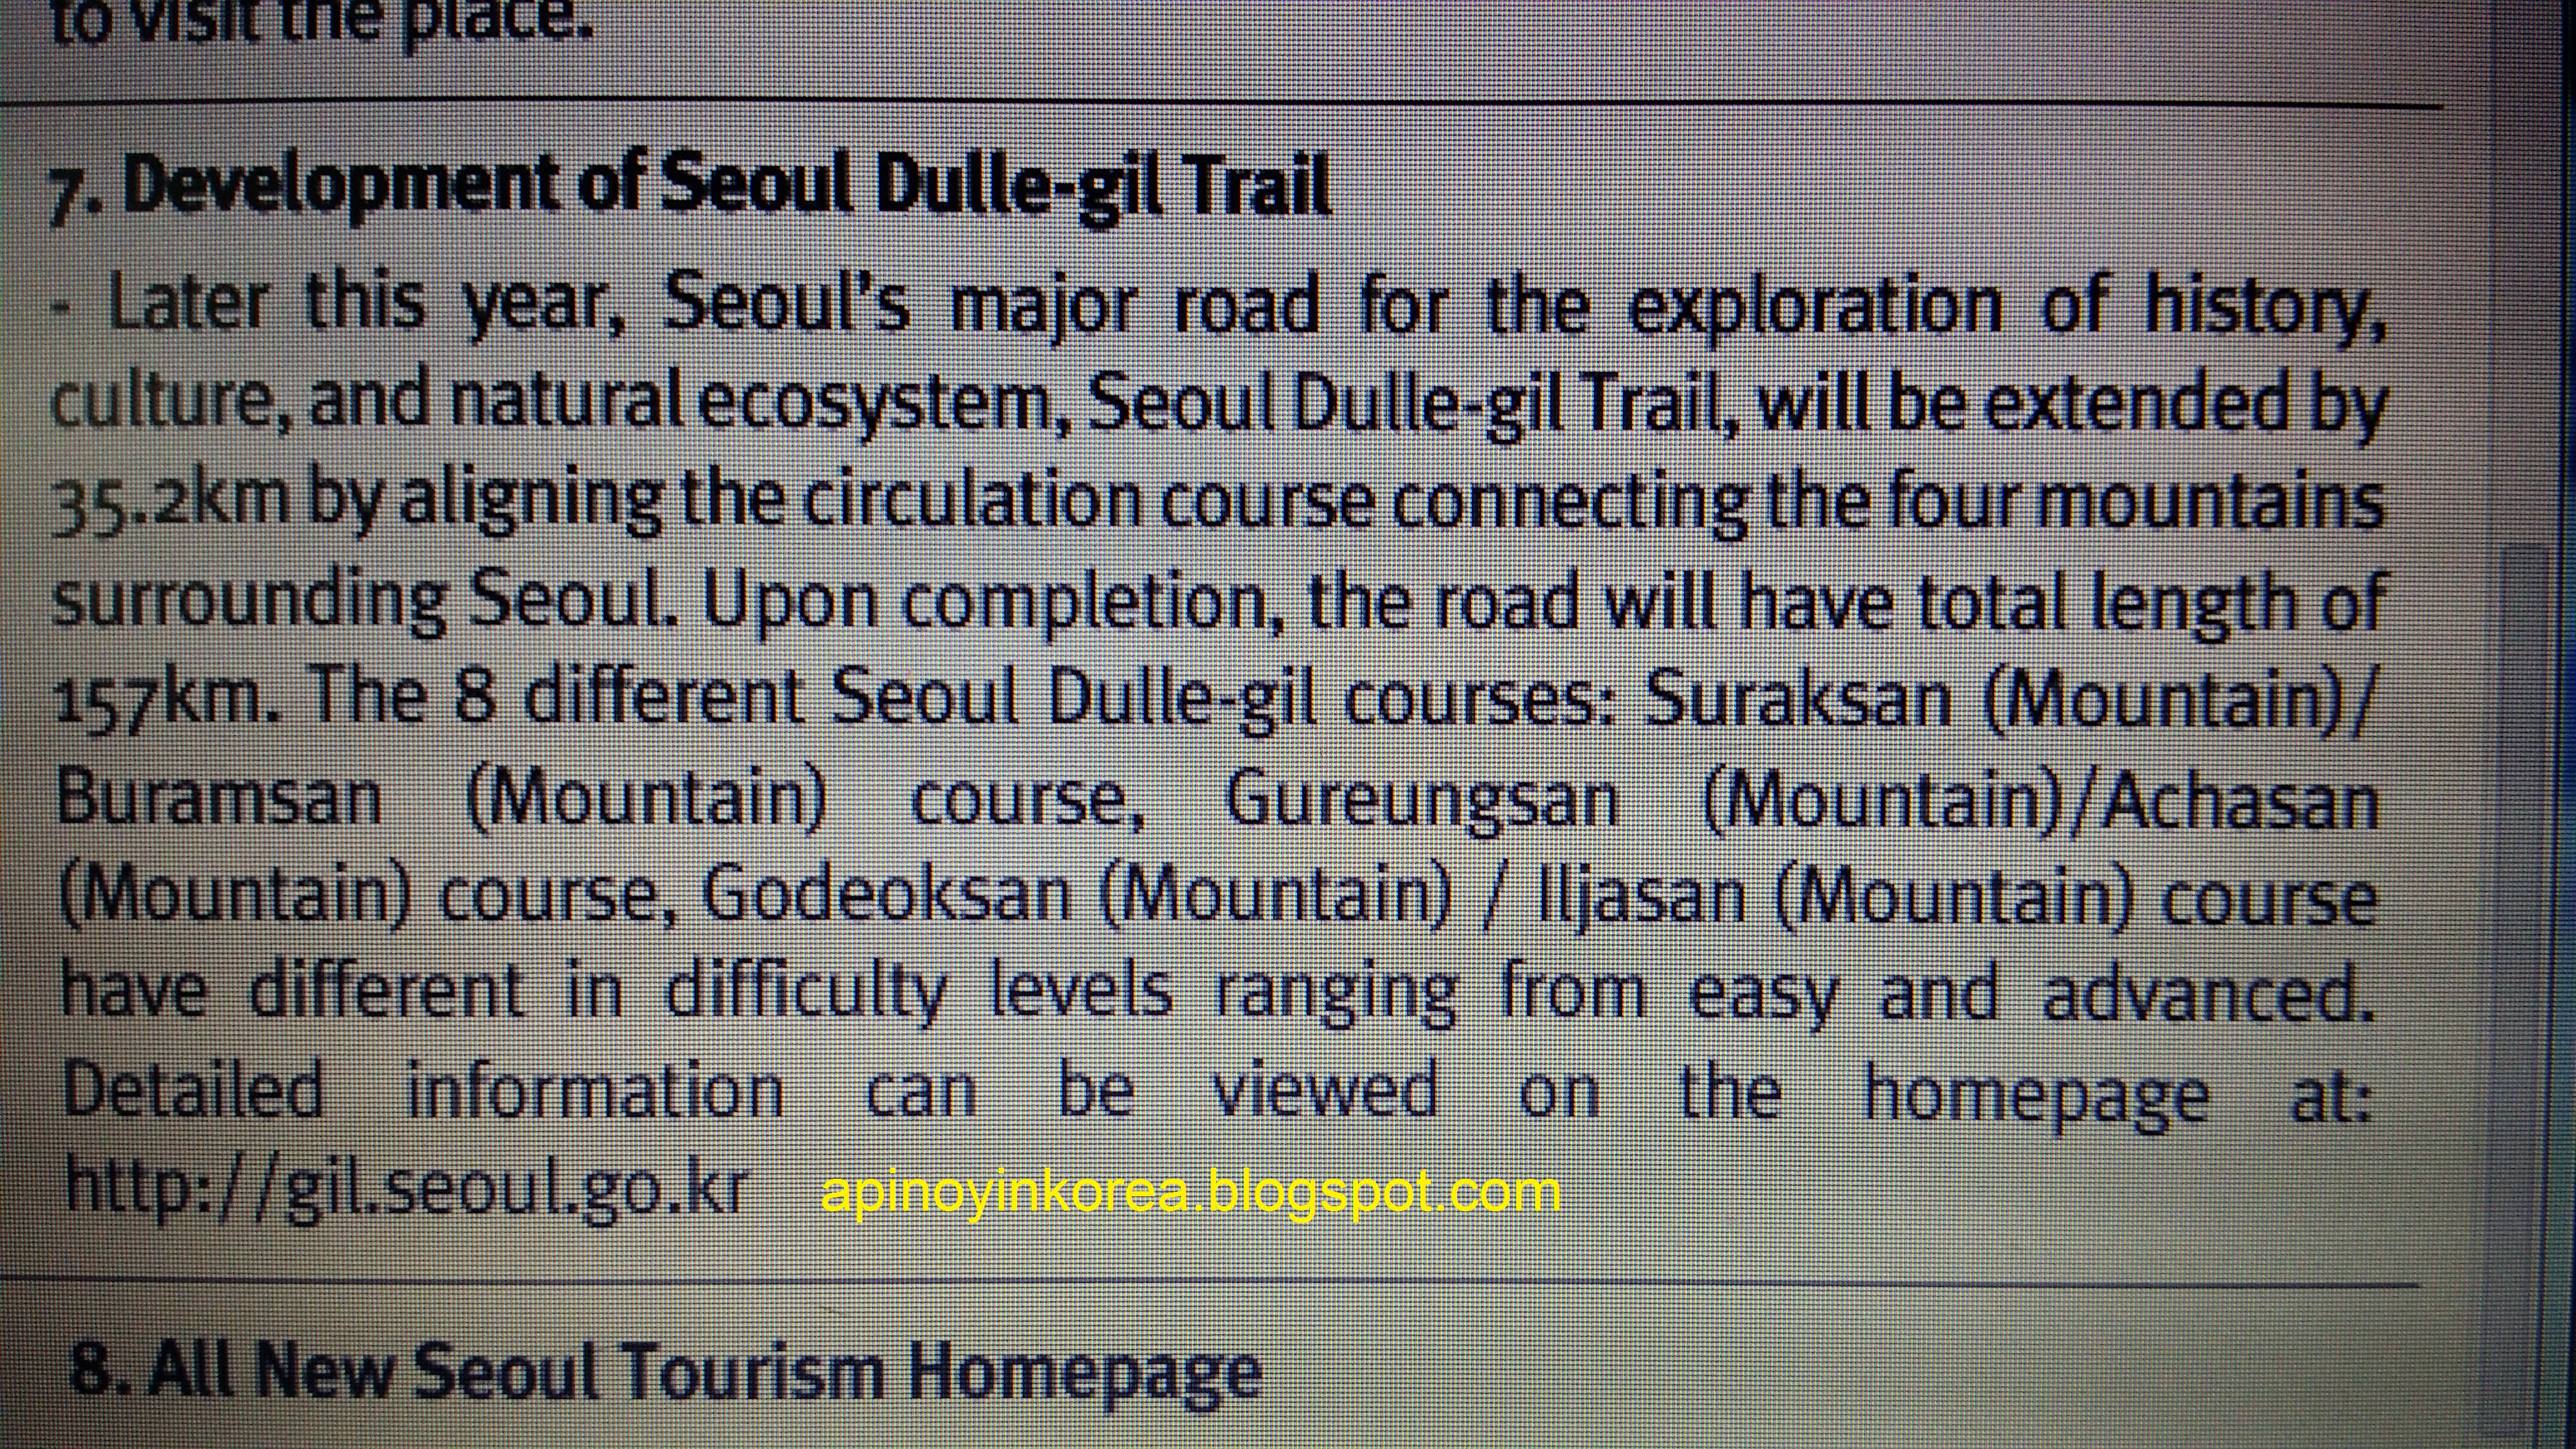 Global Seoul Mates 4th Mission: The Mountain Trails and Undisciplined Drivers in Seoul